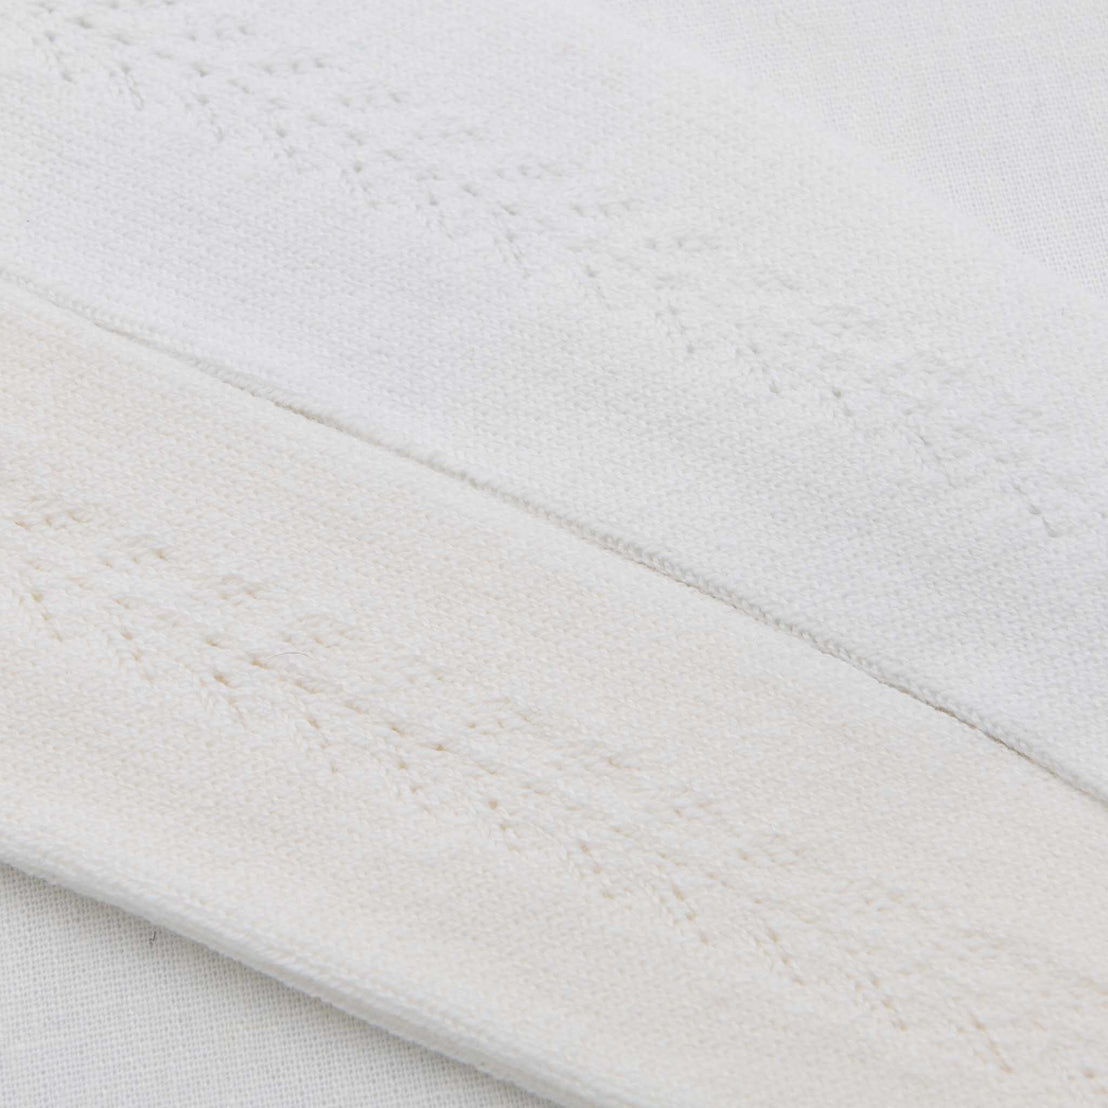 Close-up of Side Openwork Tights, suitable for a christening gown, showing detailed stitching and fibers.